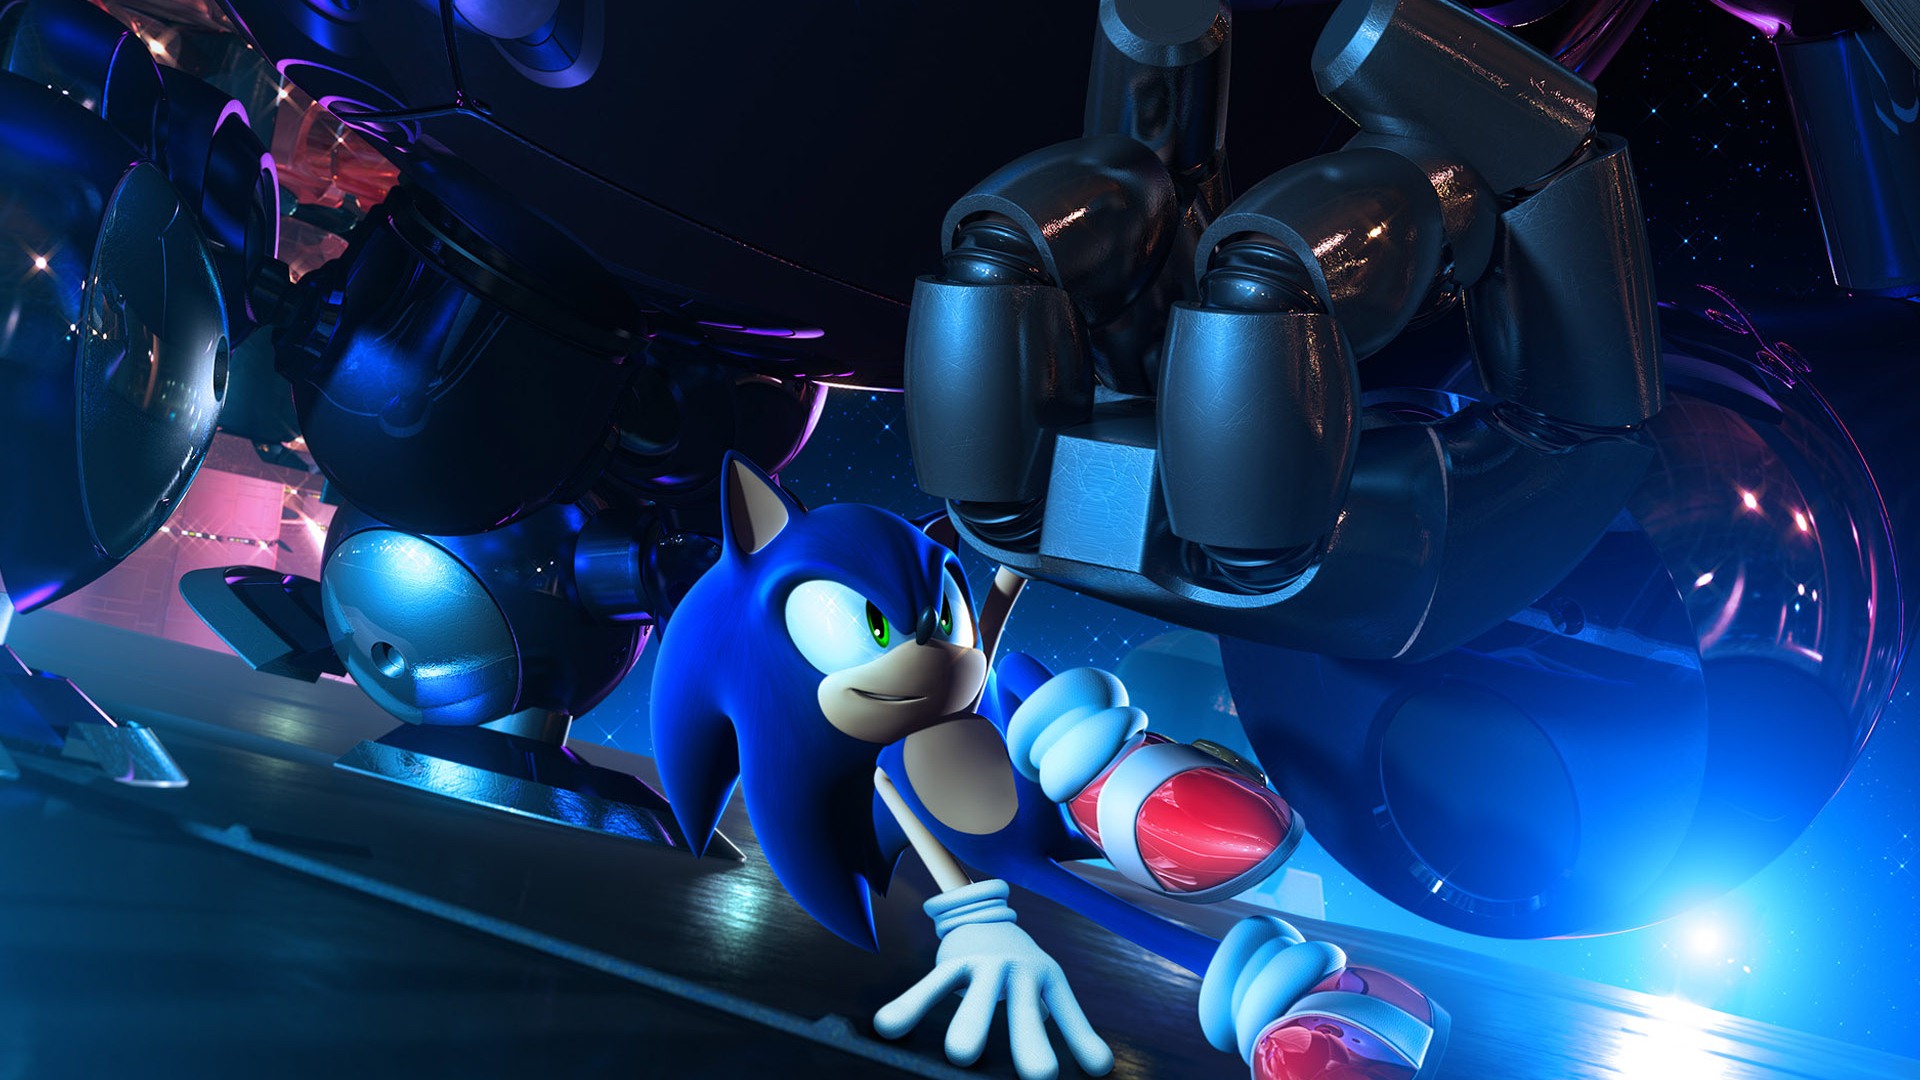 Sonic HD wallpapers #2 - 1920x1080